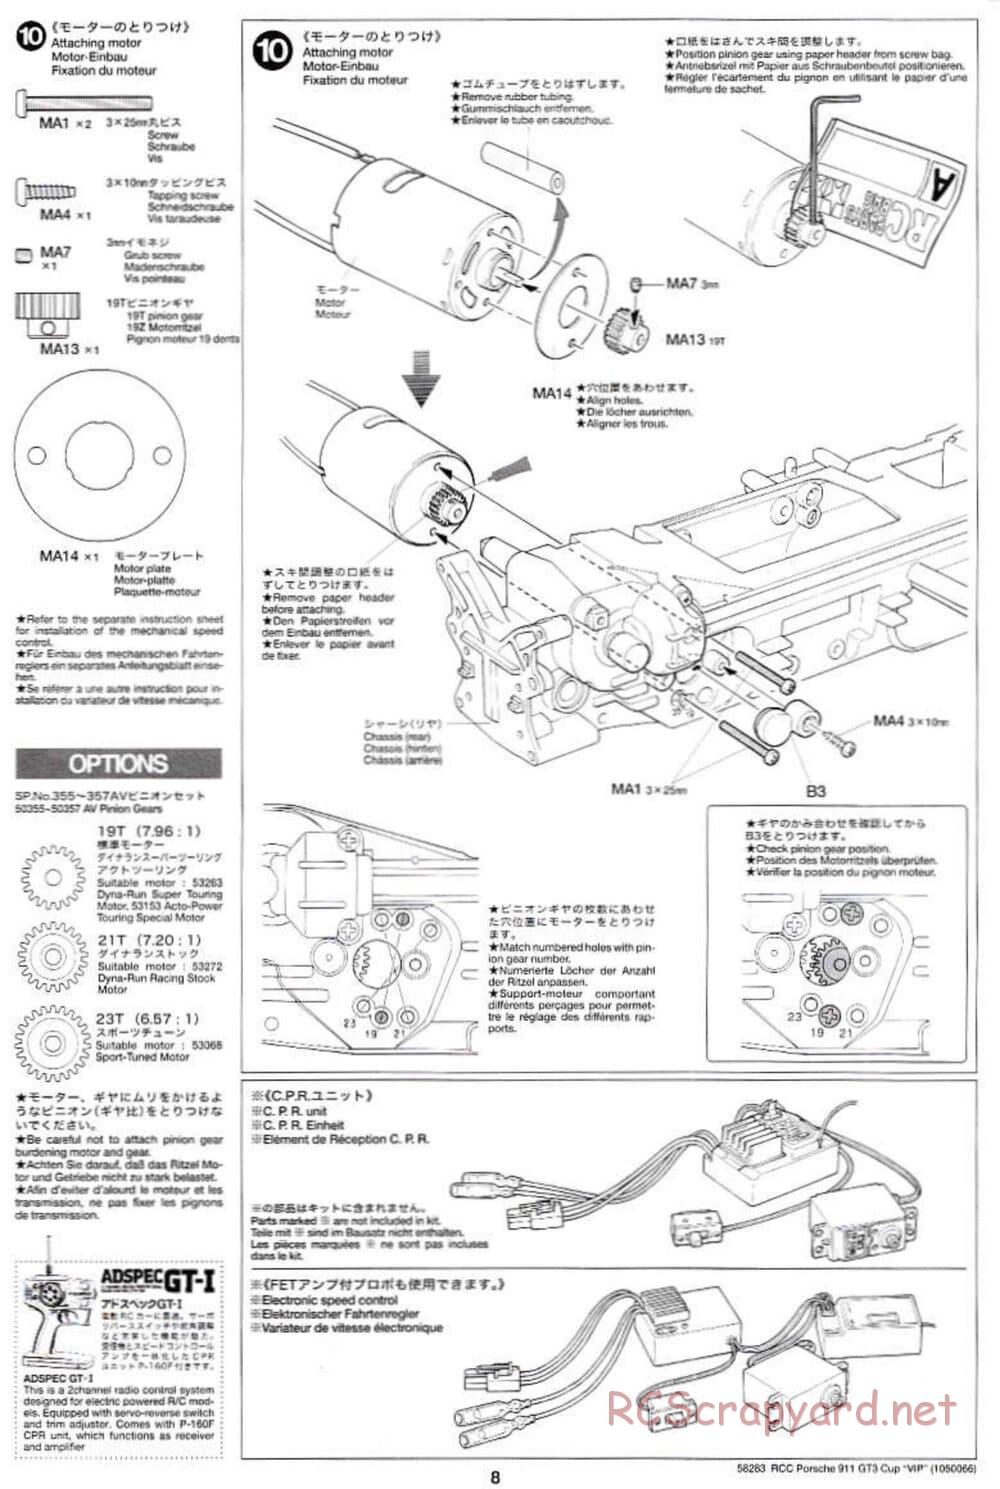 Tamiya - Porsche 911 GT3 Cup VIP - TL-01 Chassis - Manual - Page 8